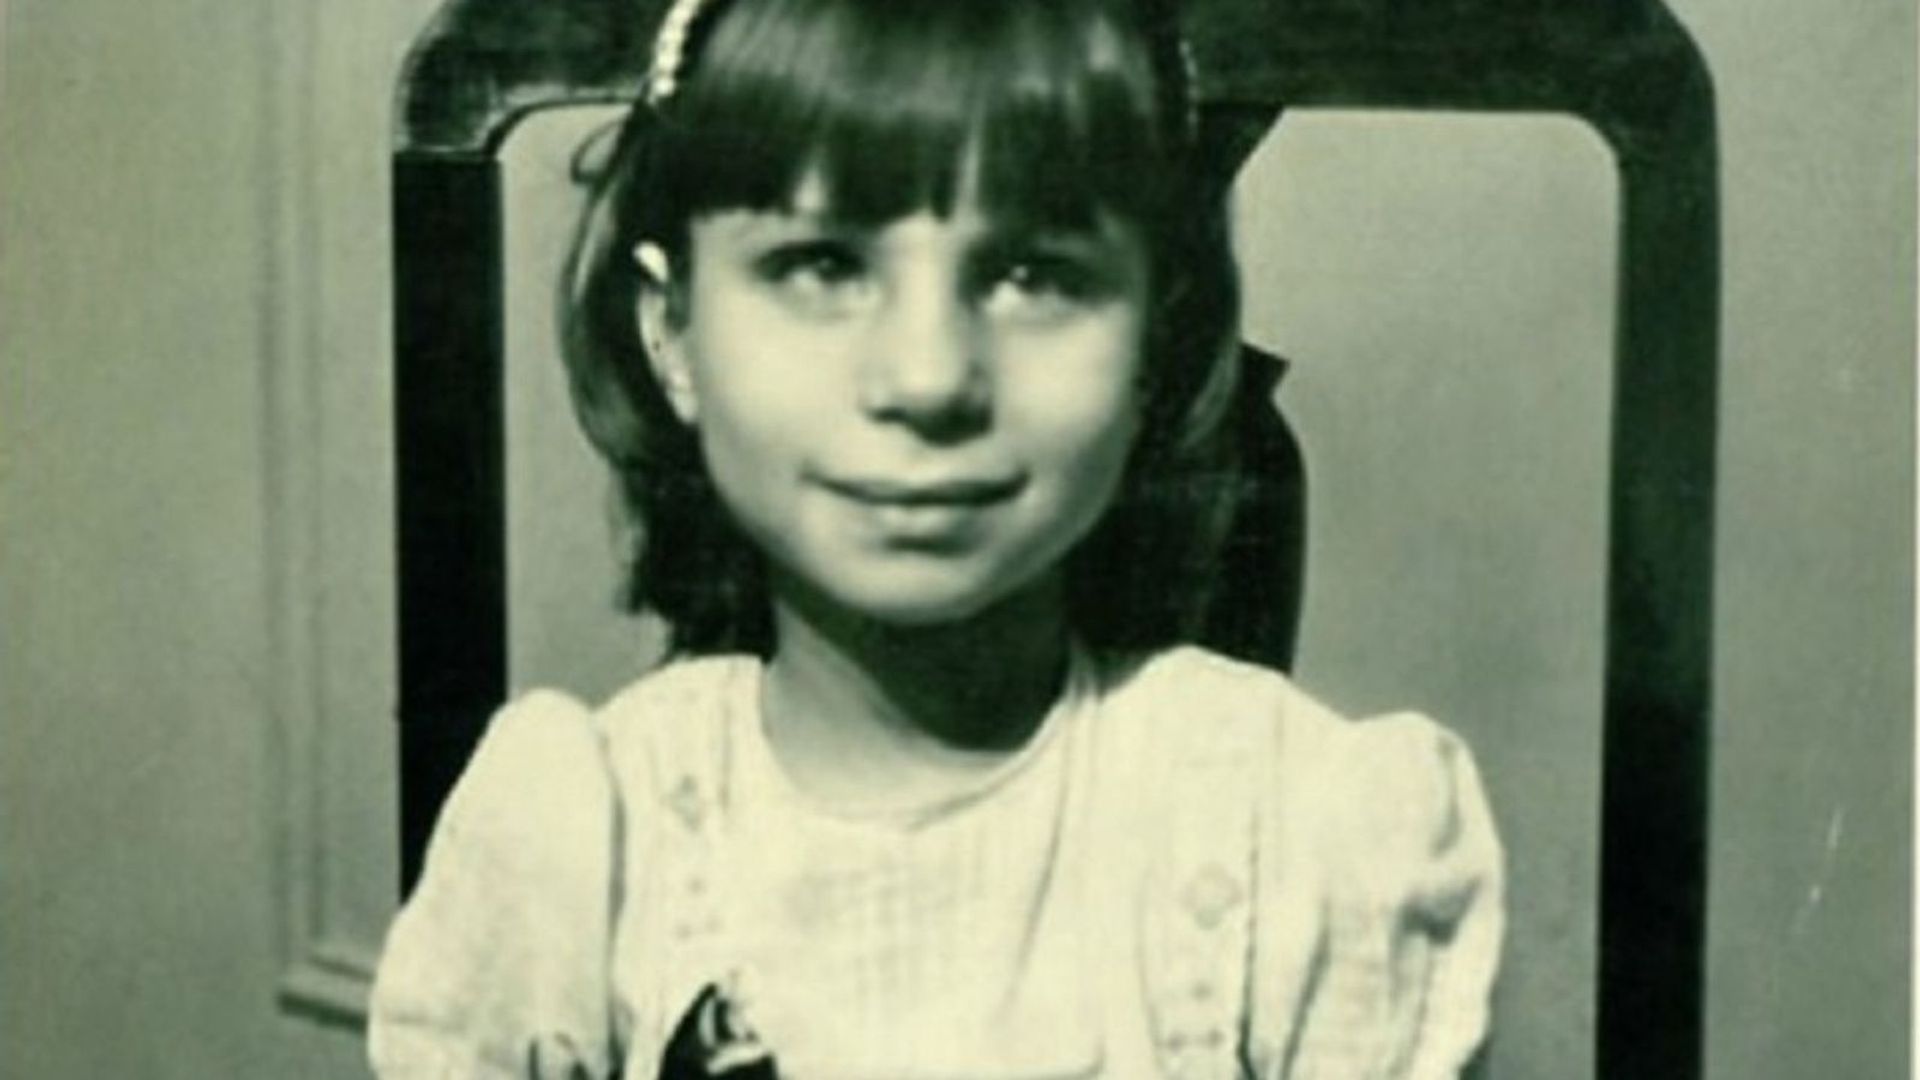 In childhood, Barbara Streisand was considered a plain girl